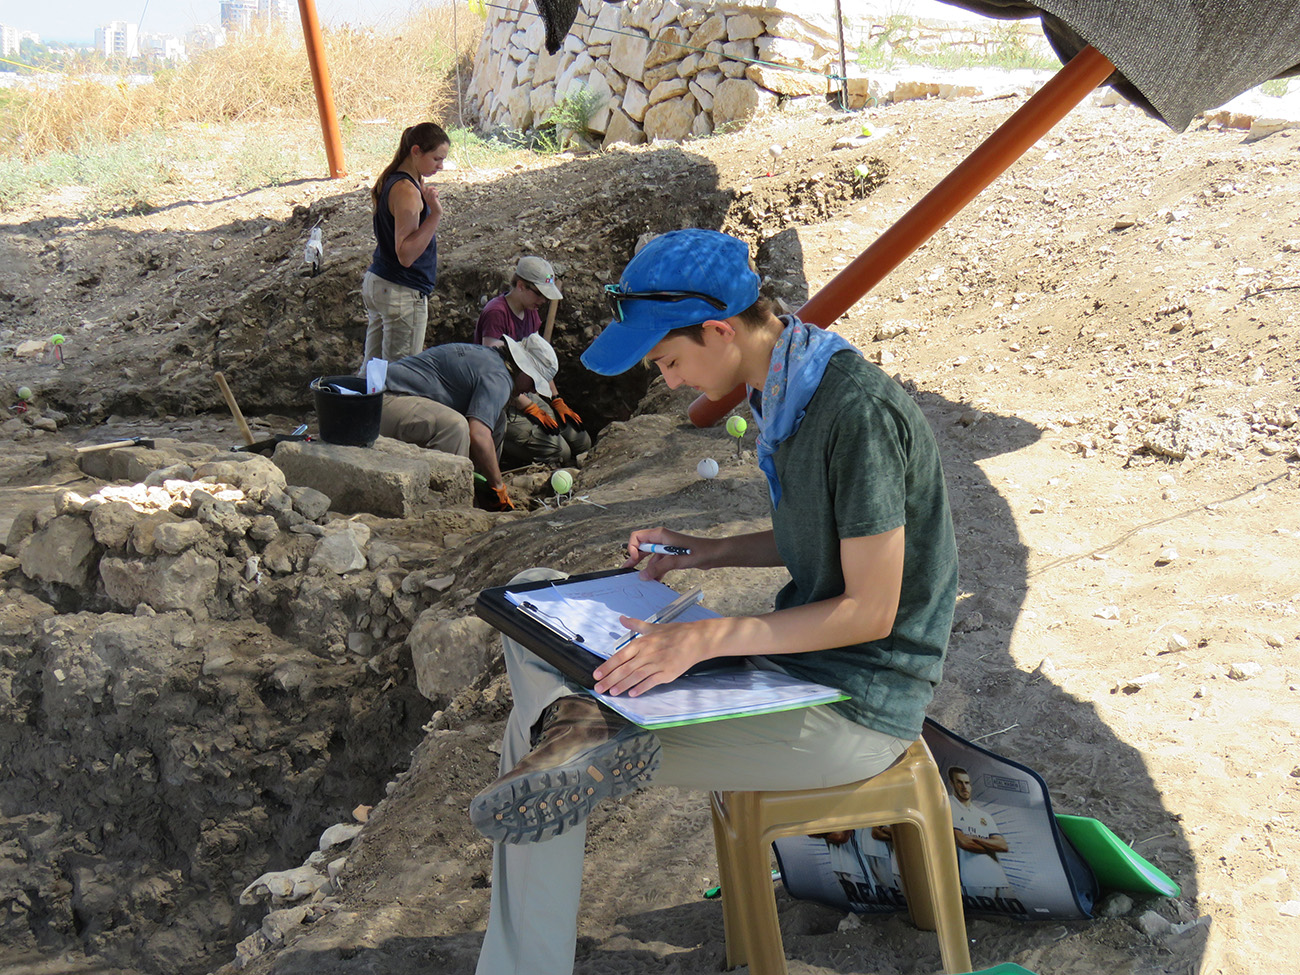 Religious Studies student sitting down and writing in a book during a excavation dig in Israel